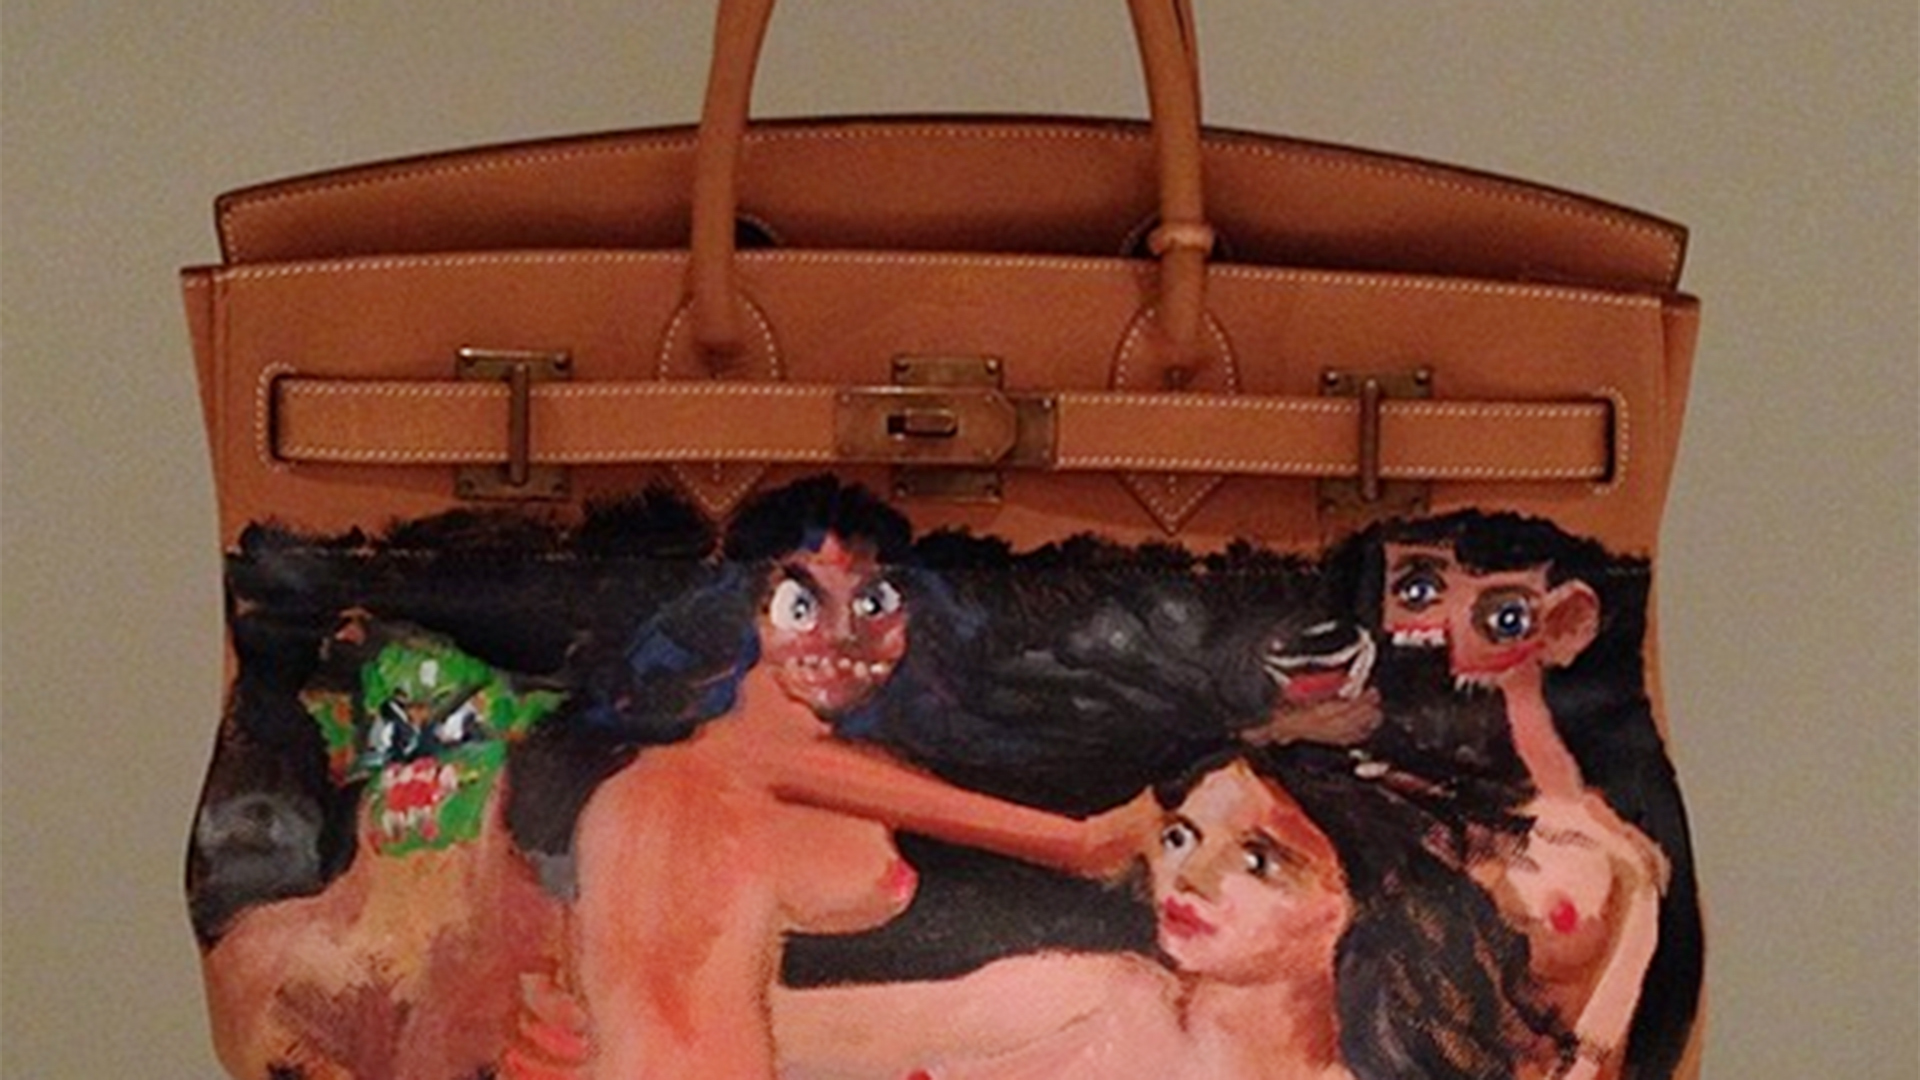 Dear Kim, Merry Christmas: Here's a Birkin bag covered in nudes